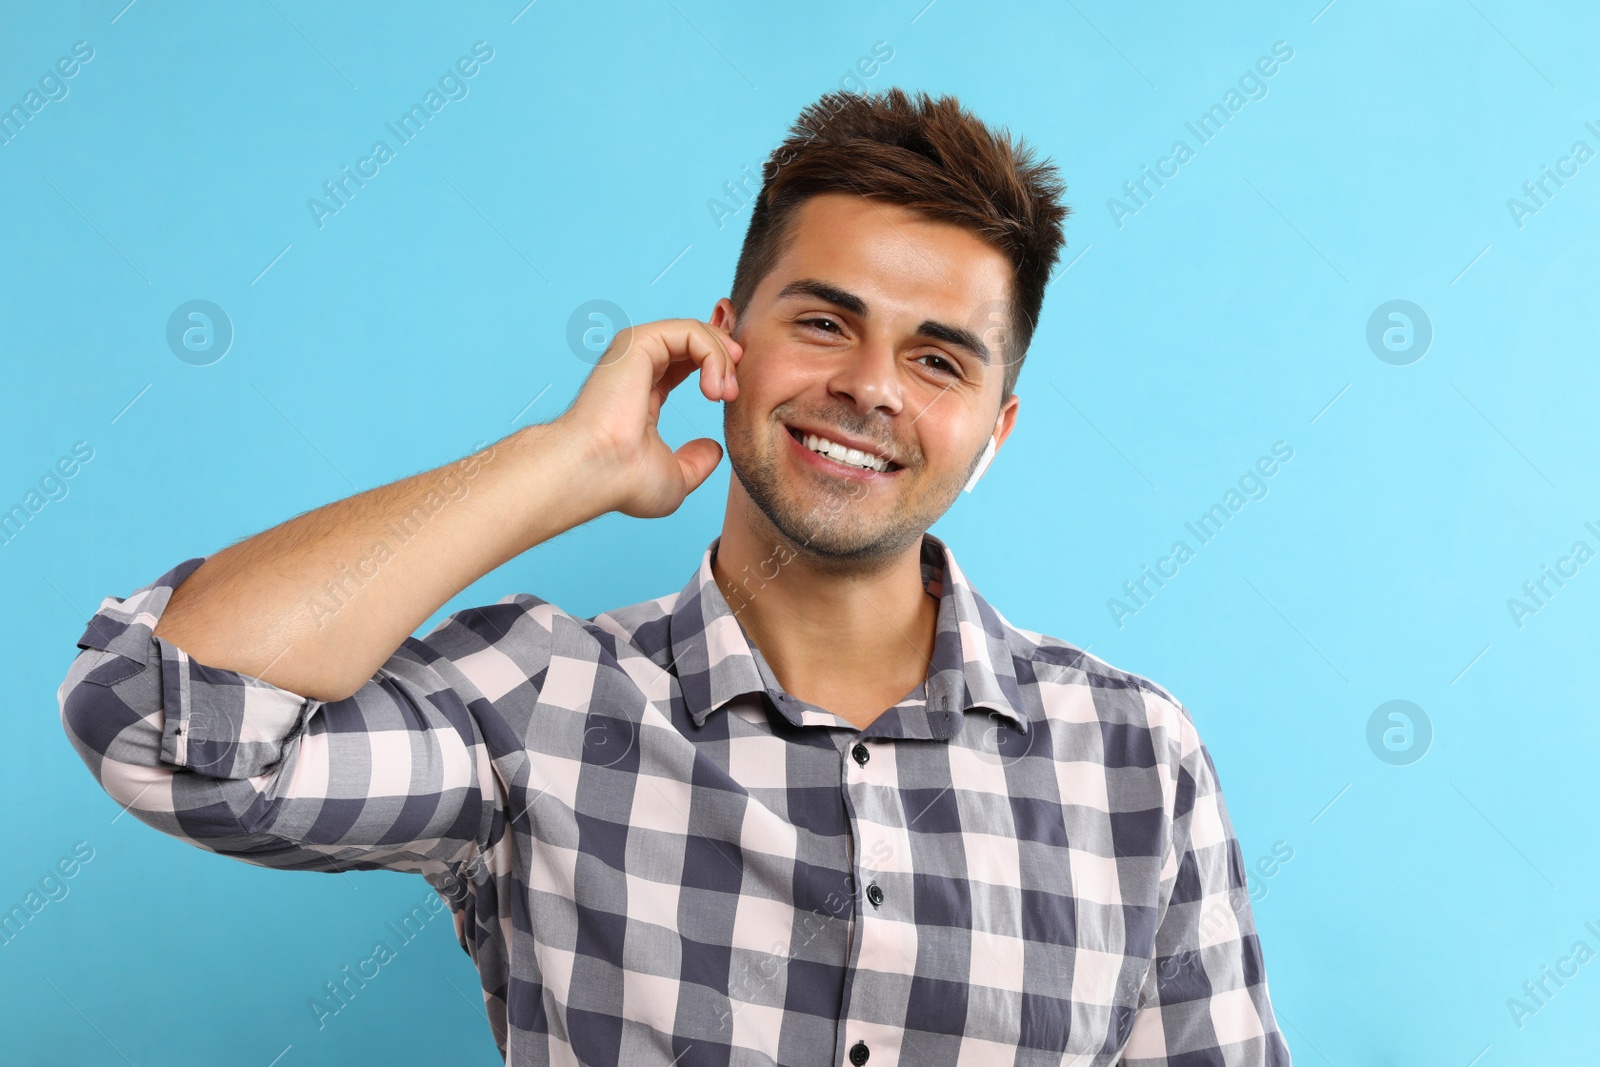 Photo of Happy young man listening to music through wireless earphones on light blue background